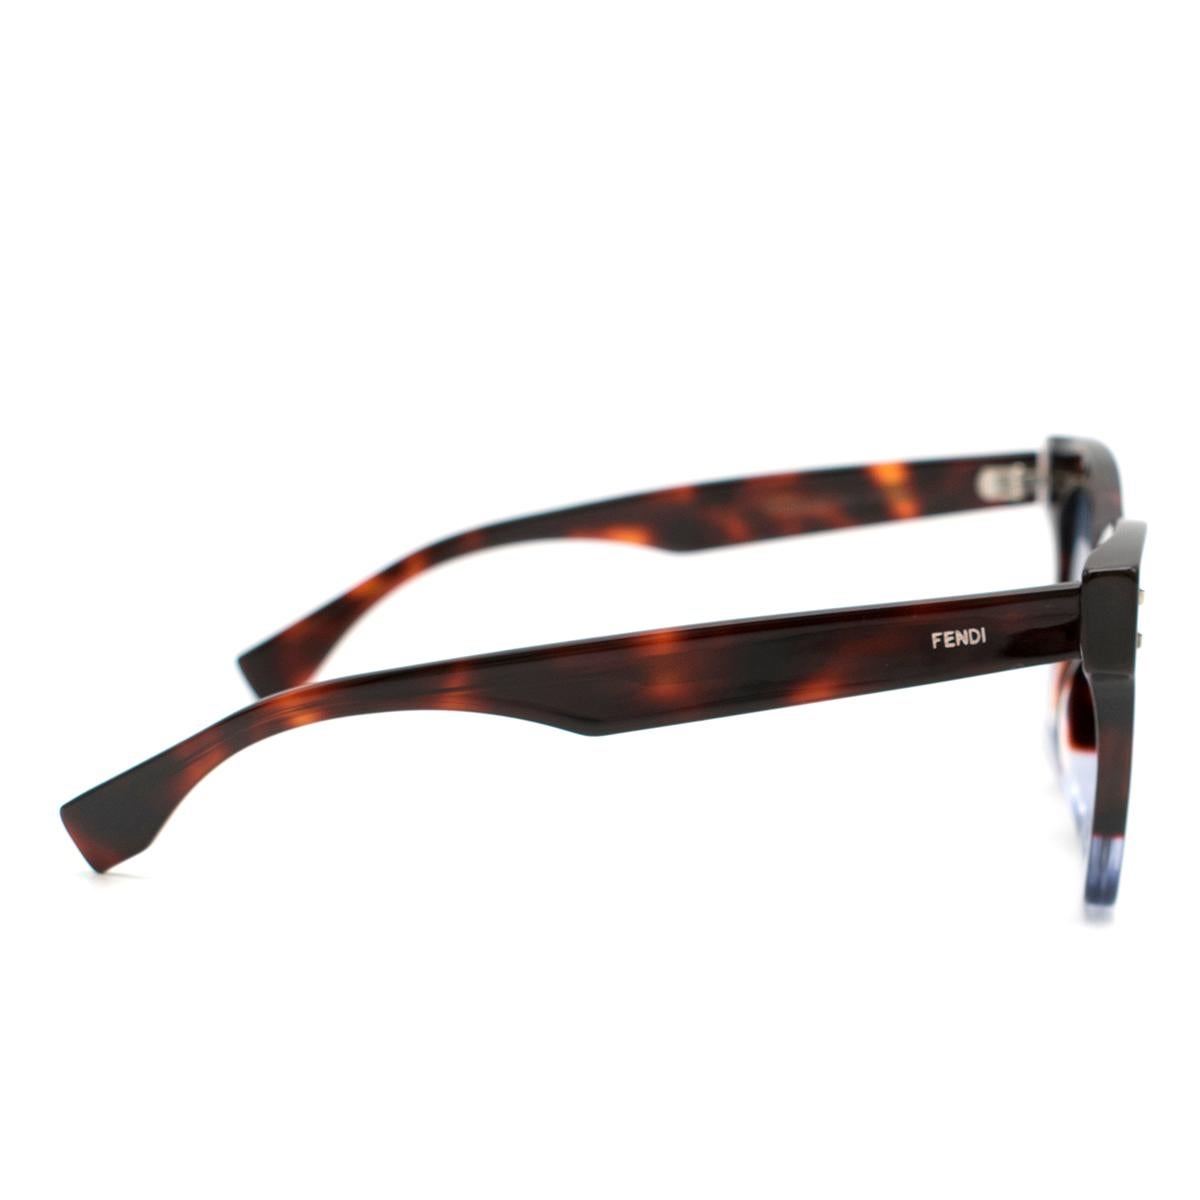 Fendi FF 0237 IPR Square Tortoiseshell Sunglasses 

-Tortoiseshell print
-Square frames
-Blue tint licenses 
-Pouch included

Please note, these items are pre-owned and may show some signs of storage, even when unworn and unused. This is reflected